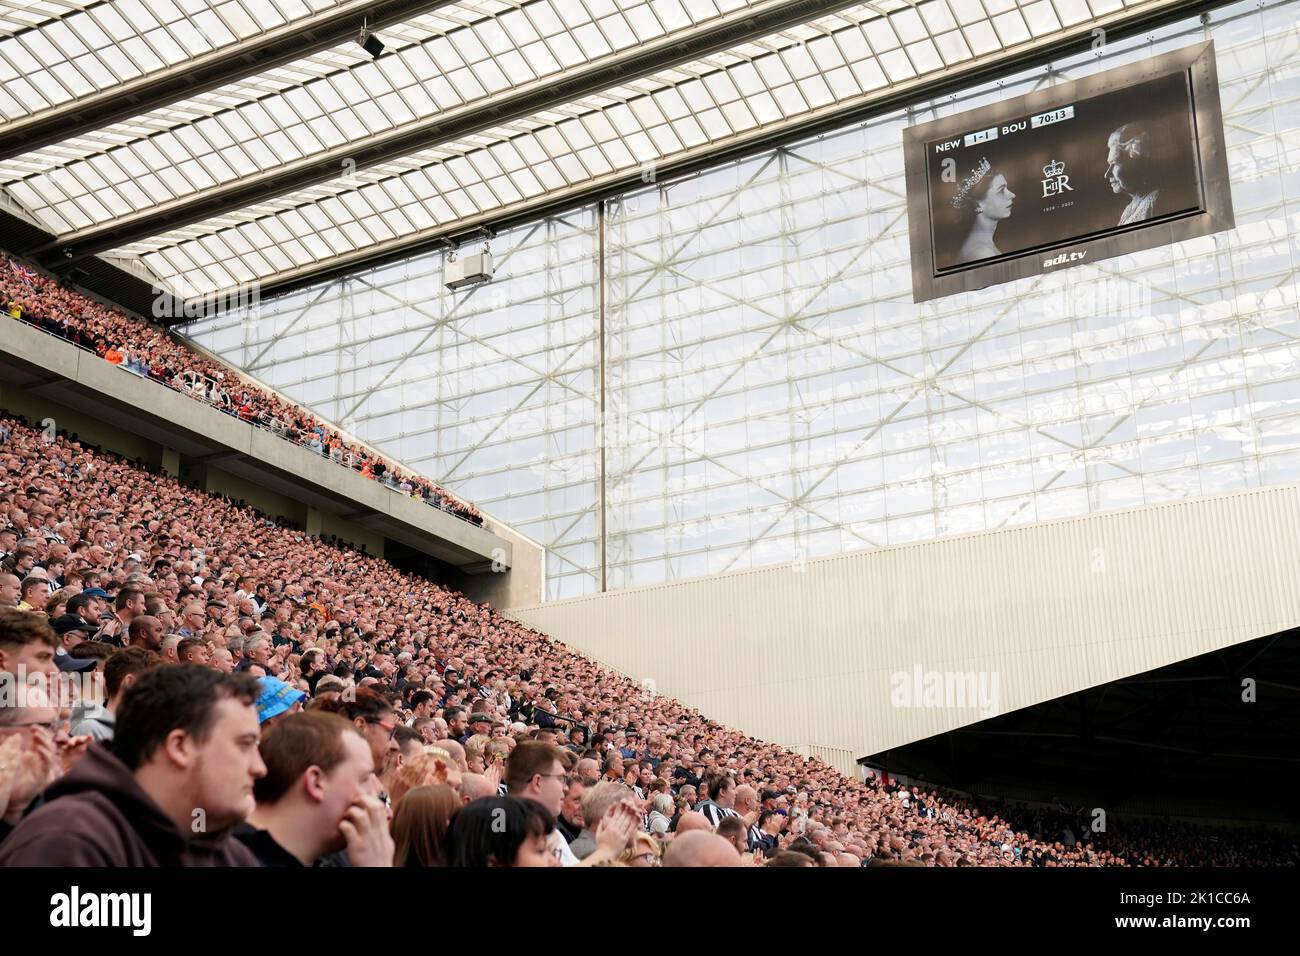 Fans applaud The Queen’s 70-year reign on the 70th minute of play during the Premier League match at St James' Park, Newcastle. Picture date: Saturday September 17, 2022. Stock Photo